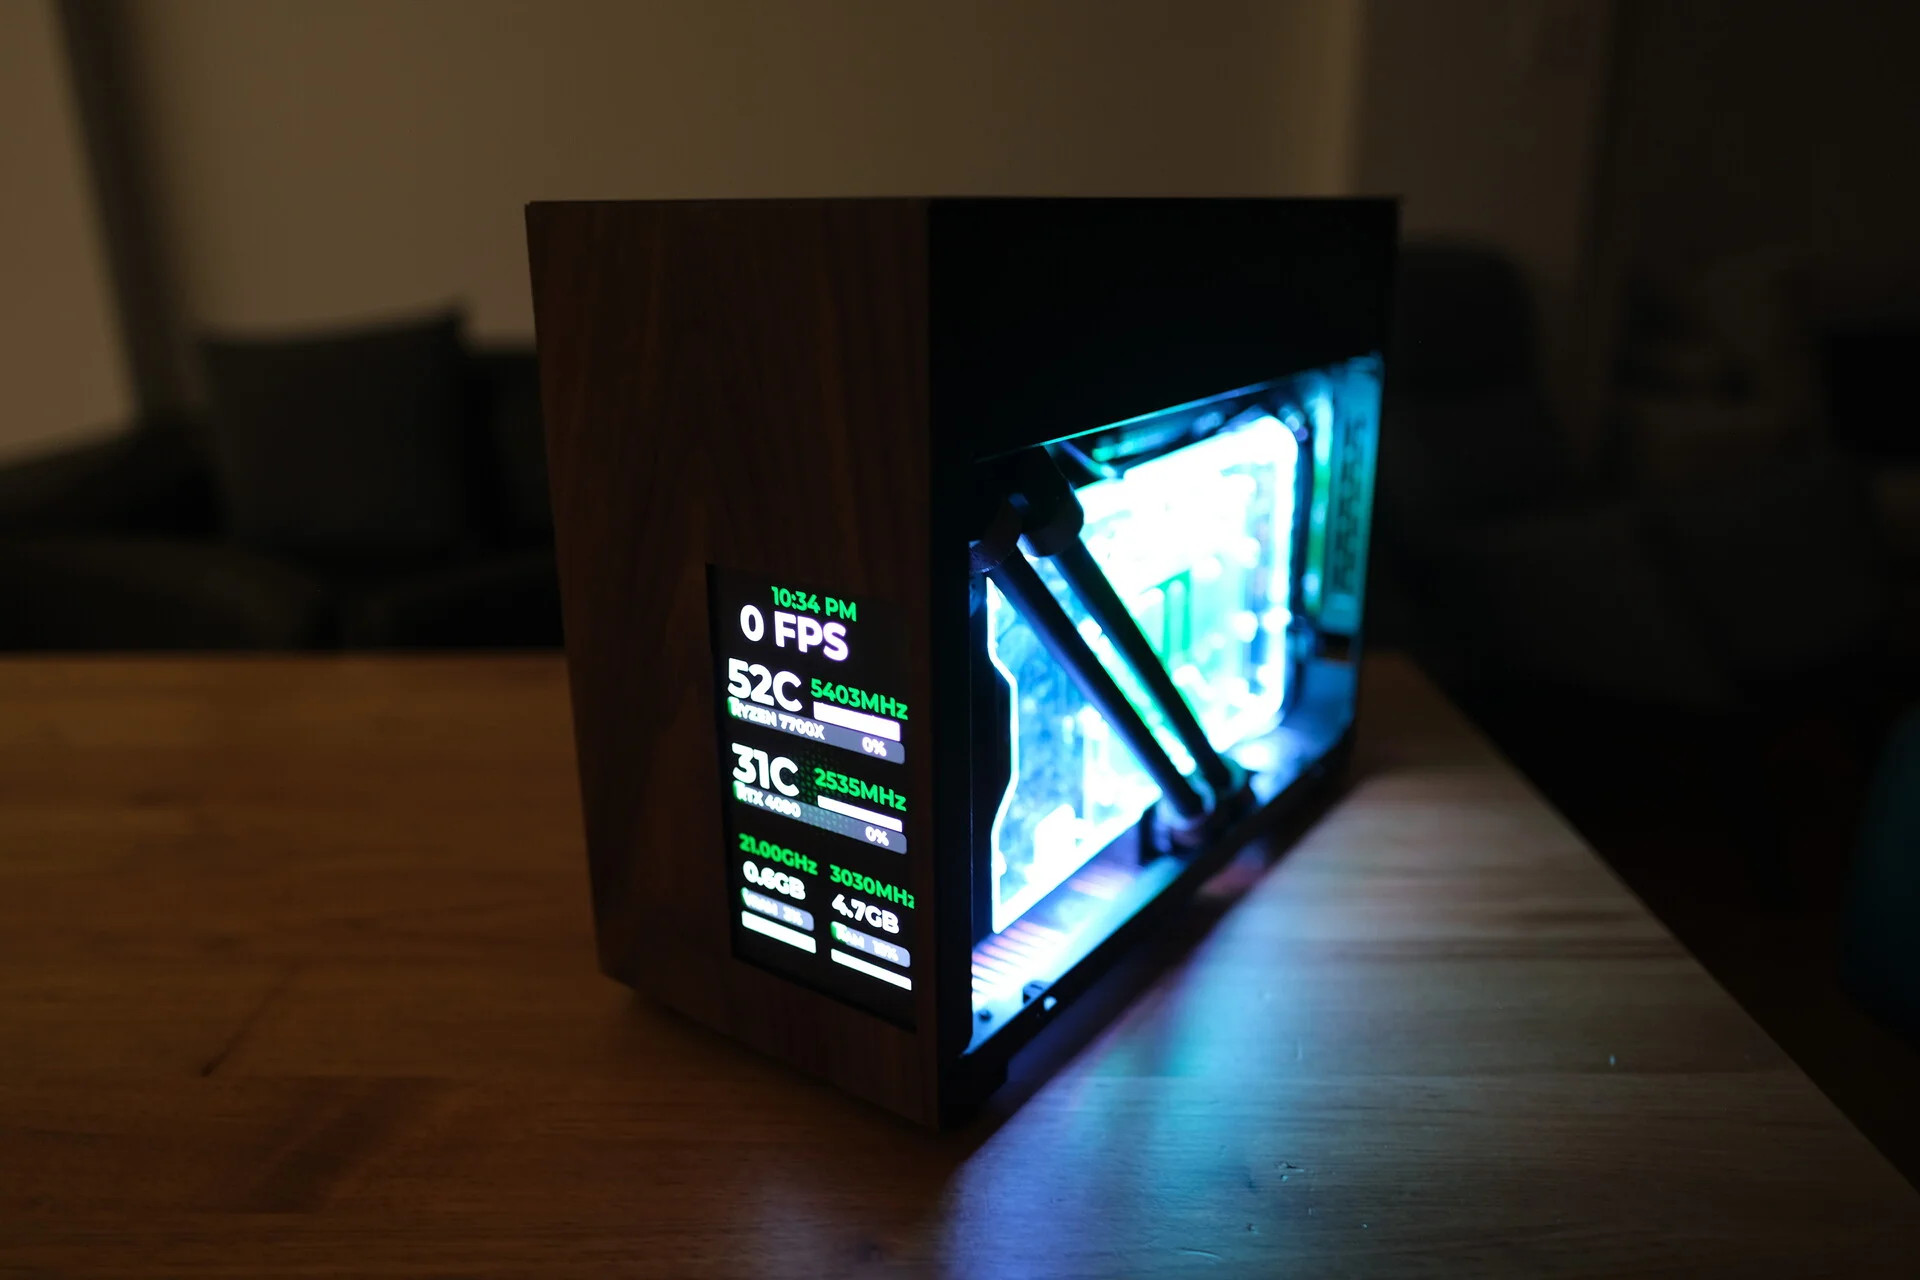 The SFF wooden PC with the GPU waterblock exposed and an LED screen showing temperatures